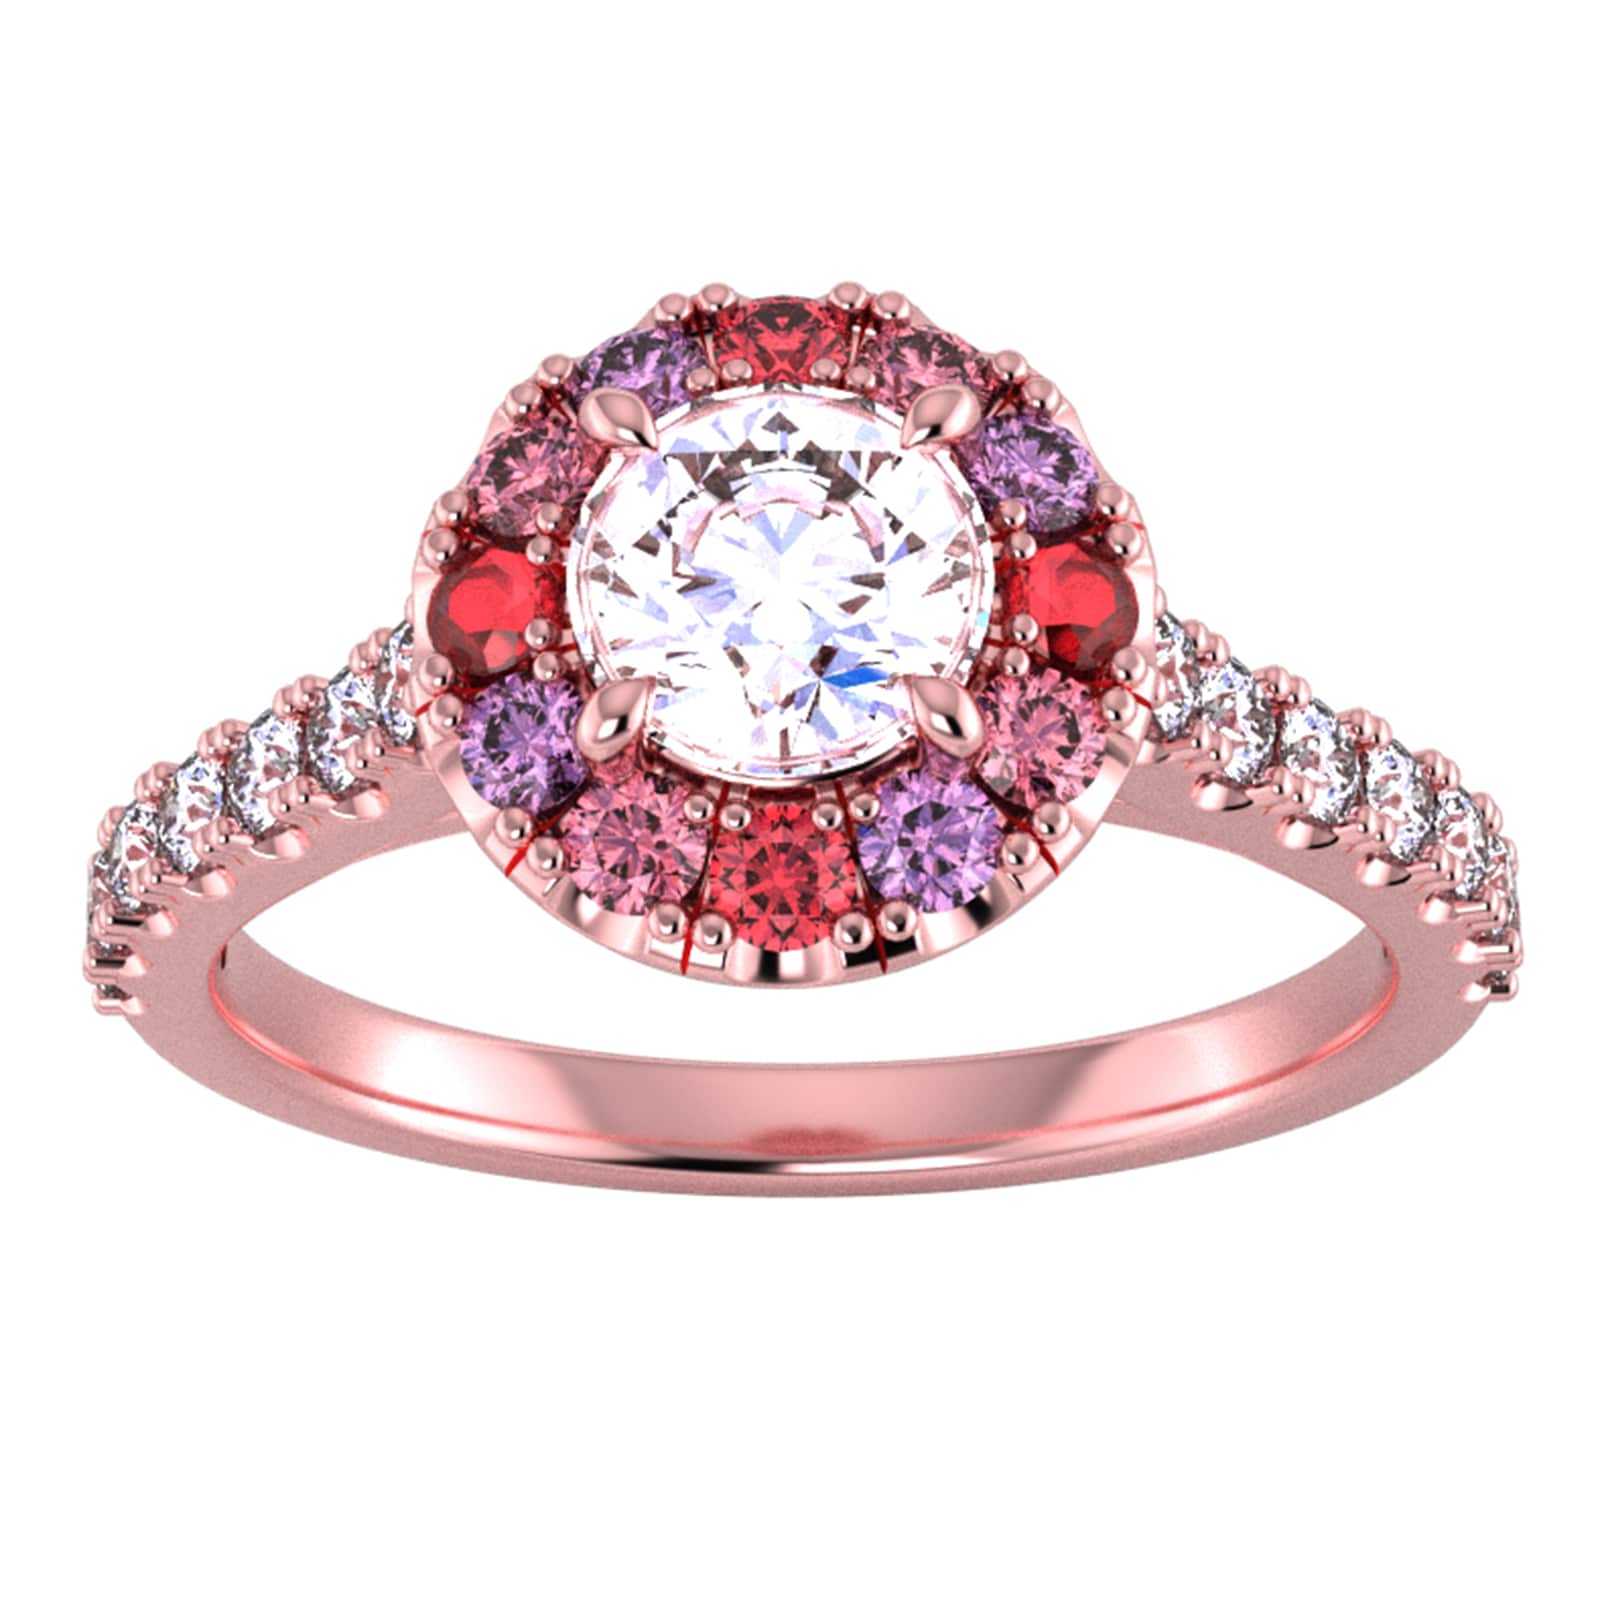 18ct Rose Gold Diamond & Pink, Red, Purple Sapphire Halo Ring - Ring Size F